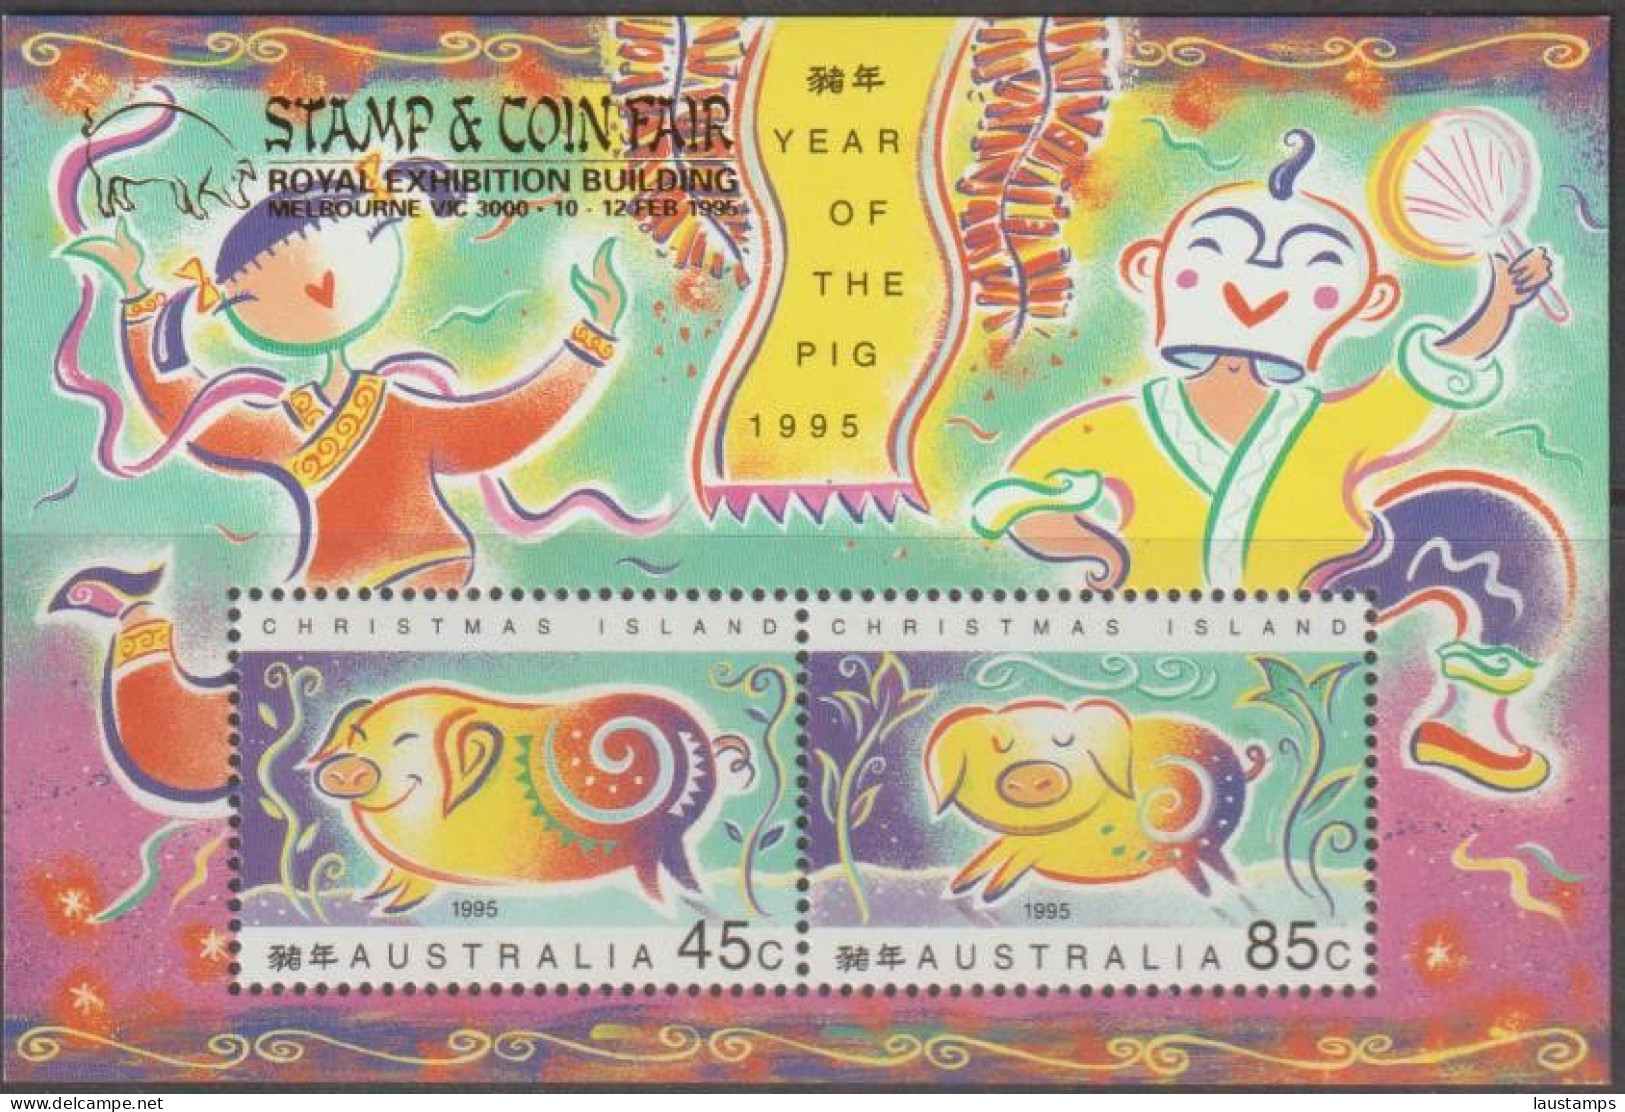 Christmas Island 1995 Year Of The Pig Ovpt Stamp & Coin Fair Melbourne S/S MNH - Chinees Nieuwjaar